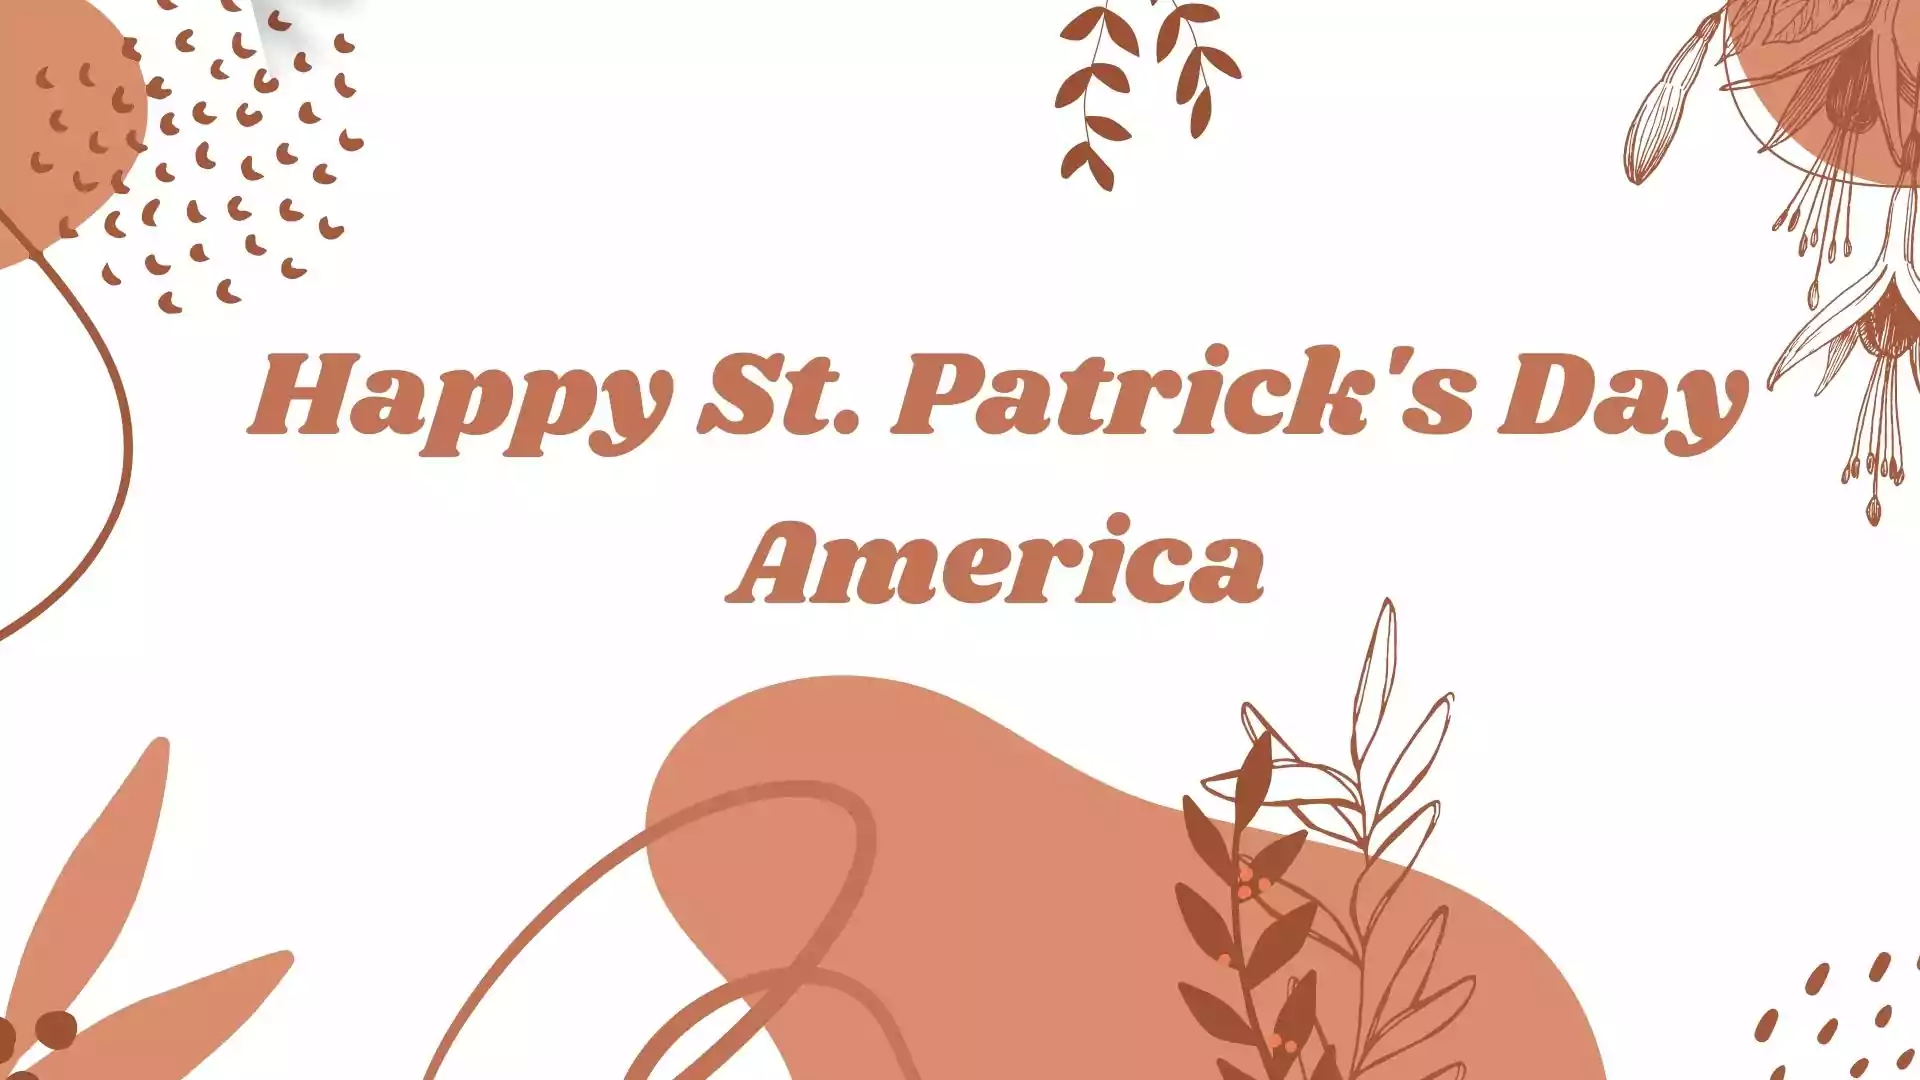 Happy St. Patrick's Day America wallpaper and images